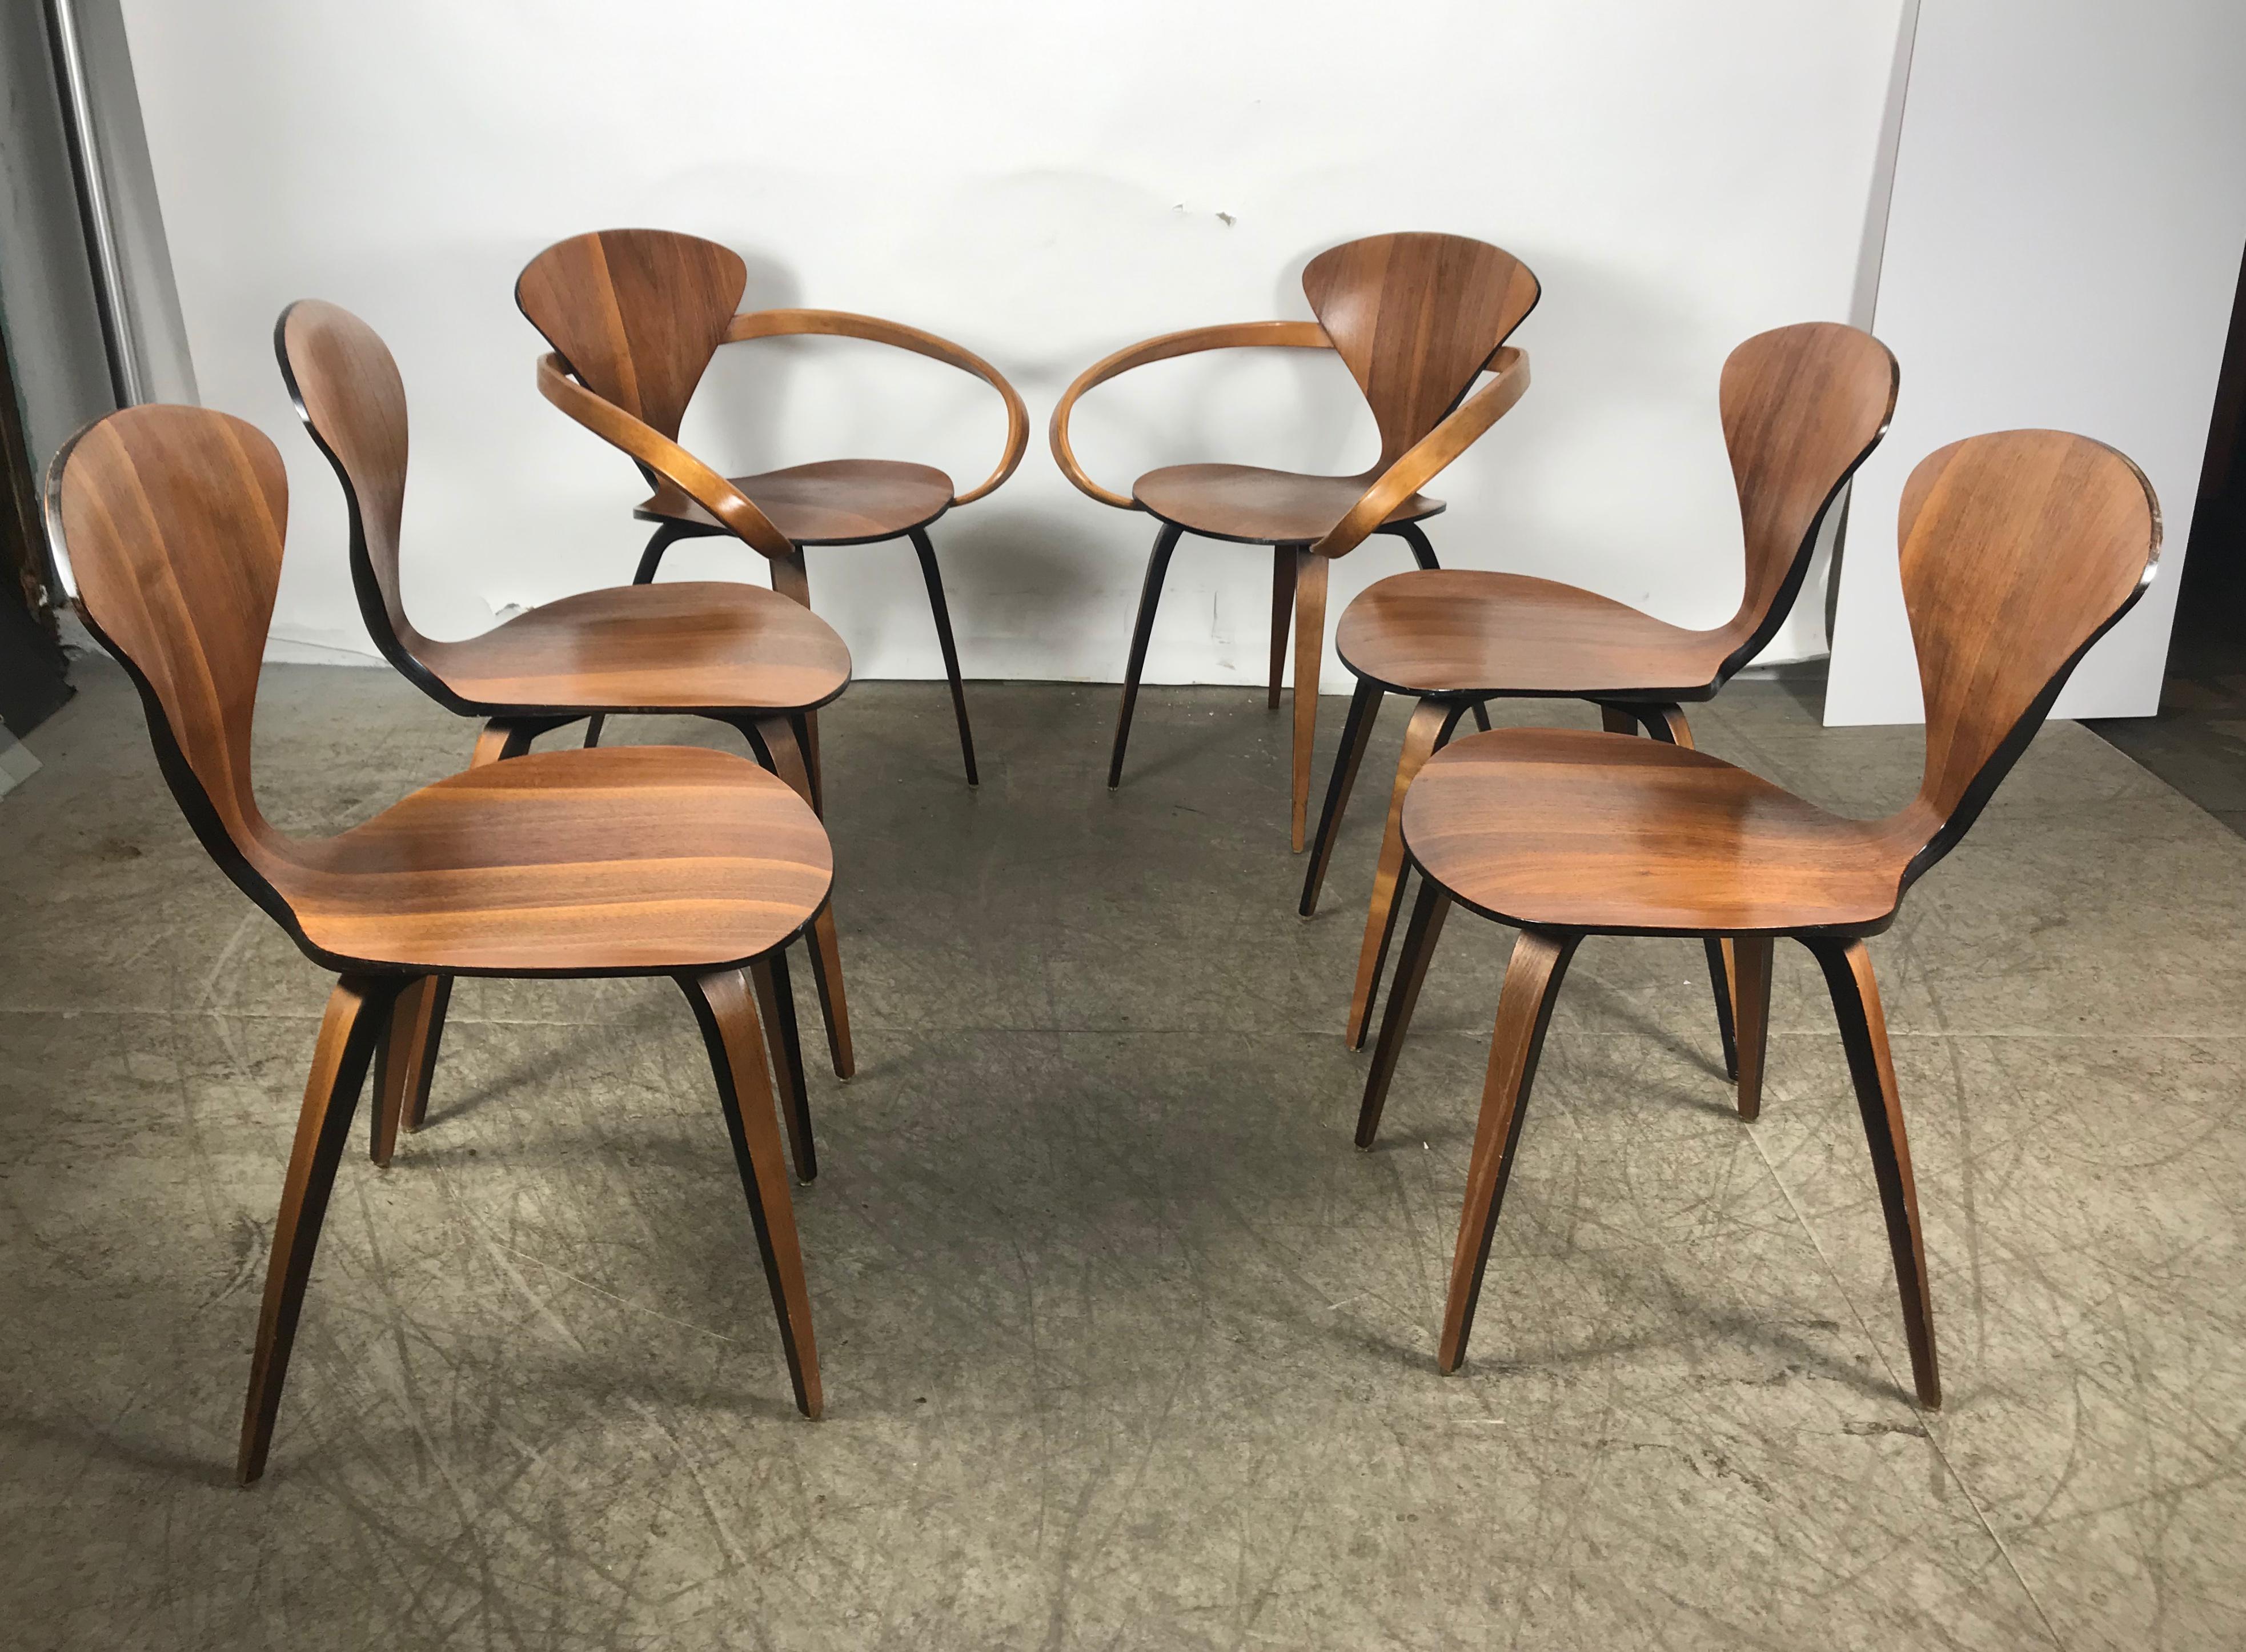 Classic Set of 6 Dining Chairs by Norman Cherner for Plycraft, Pretzel Captain 3